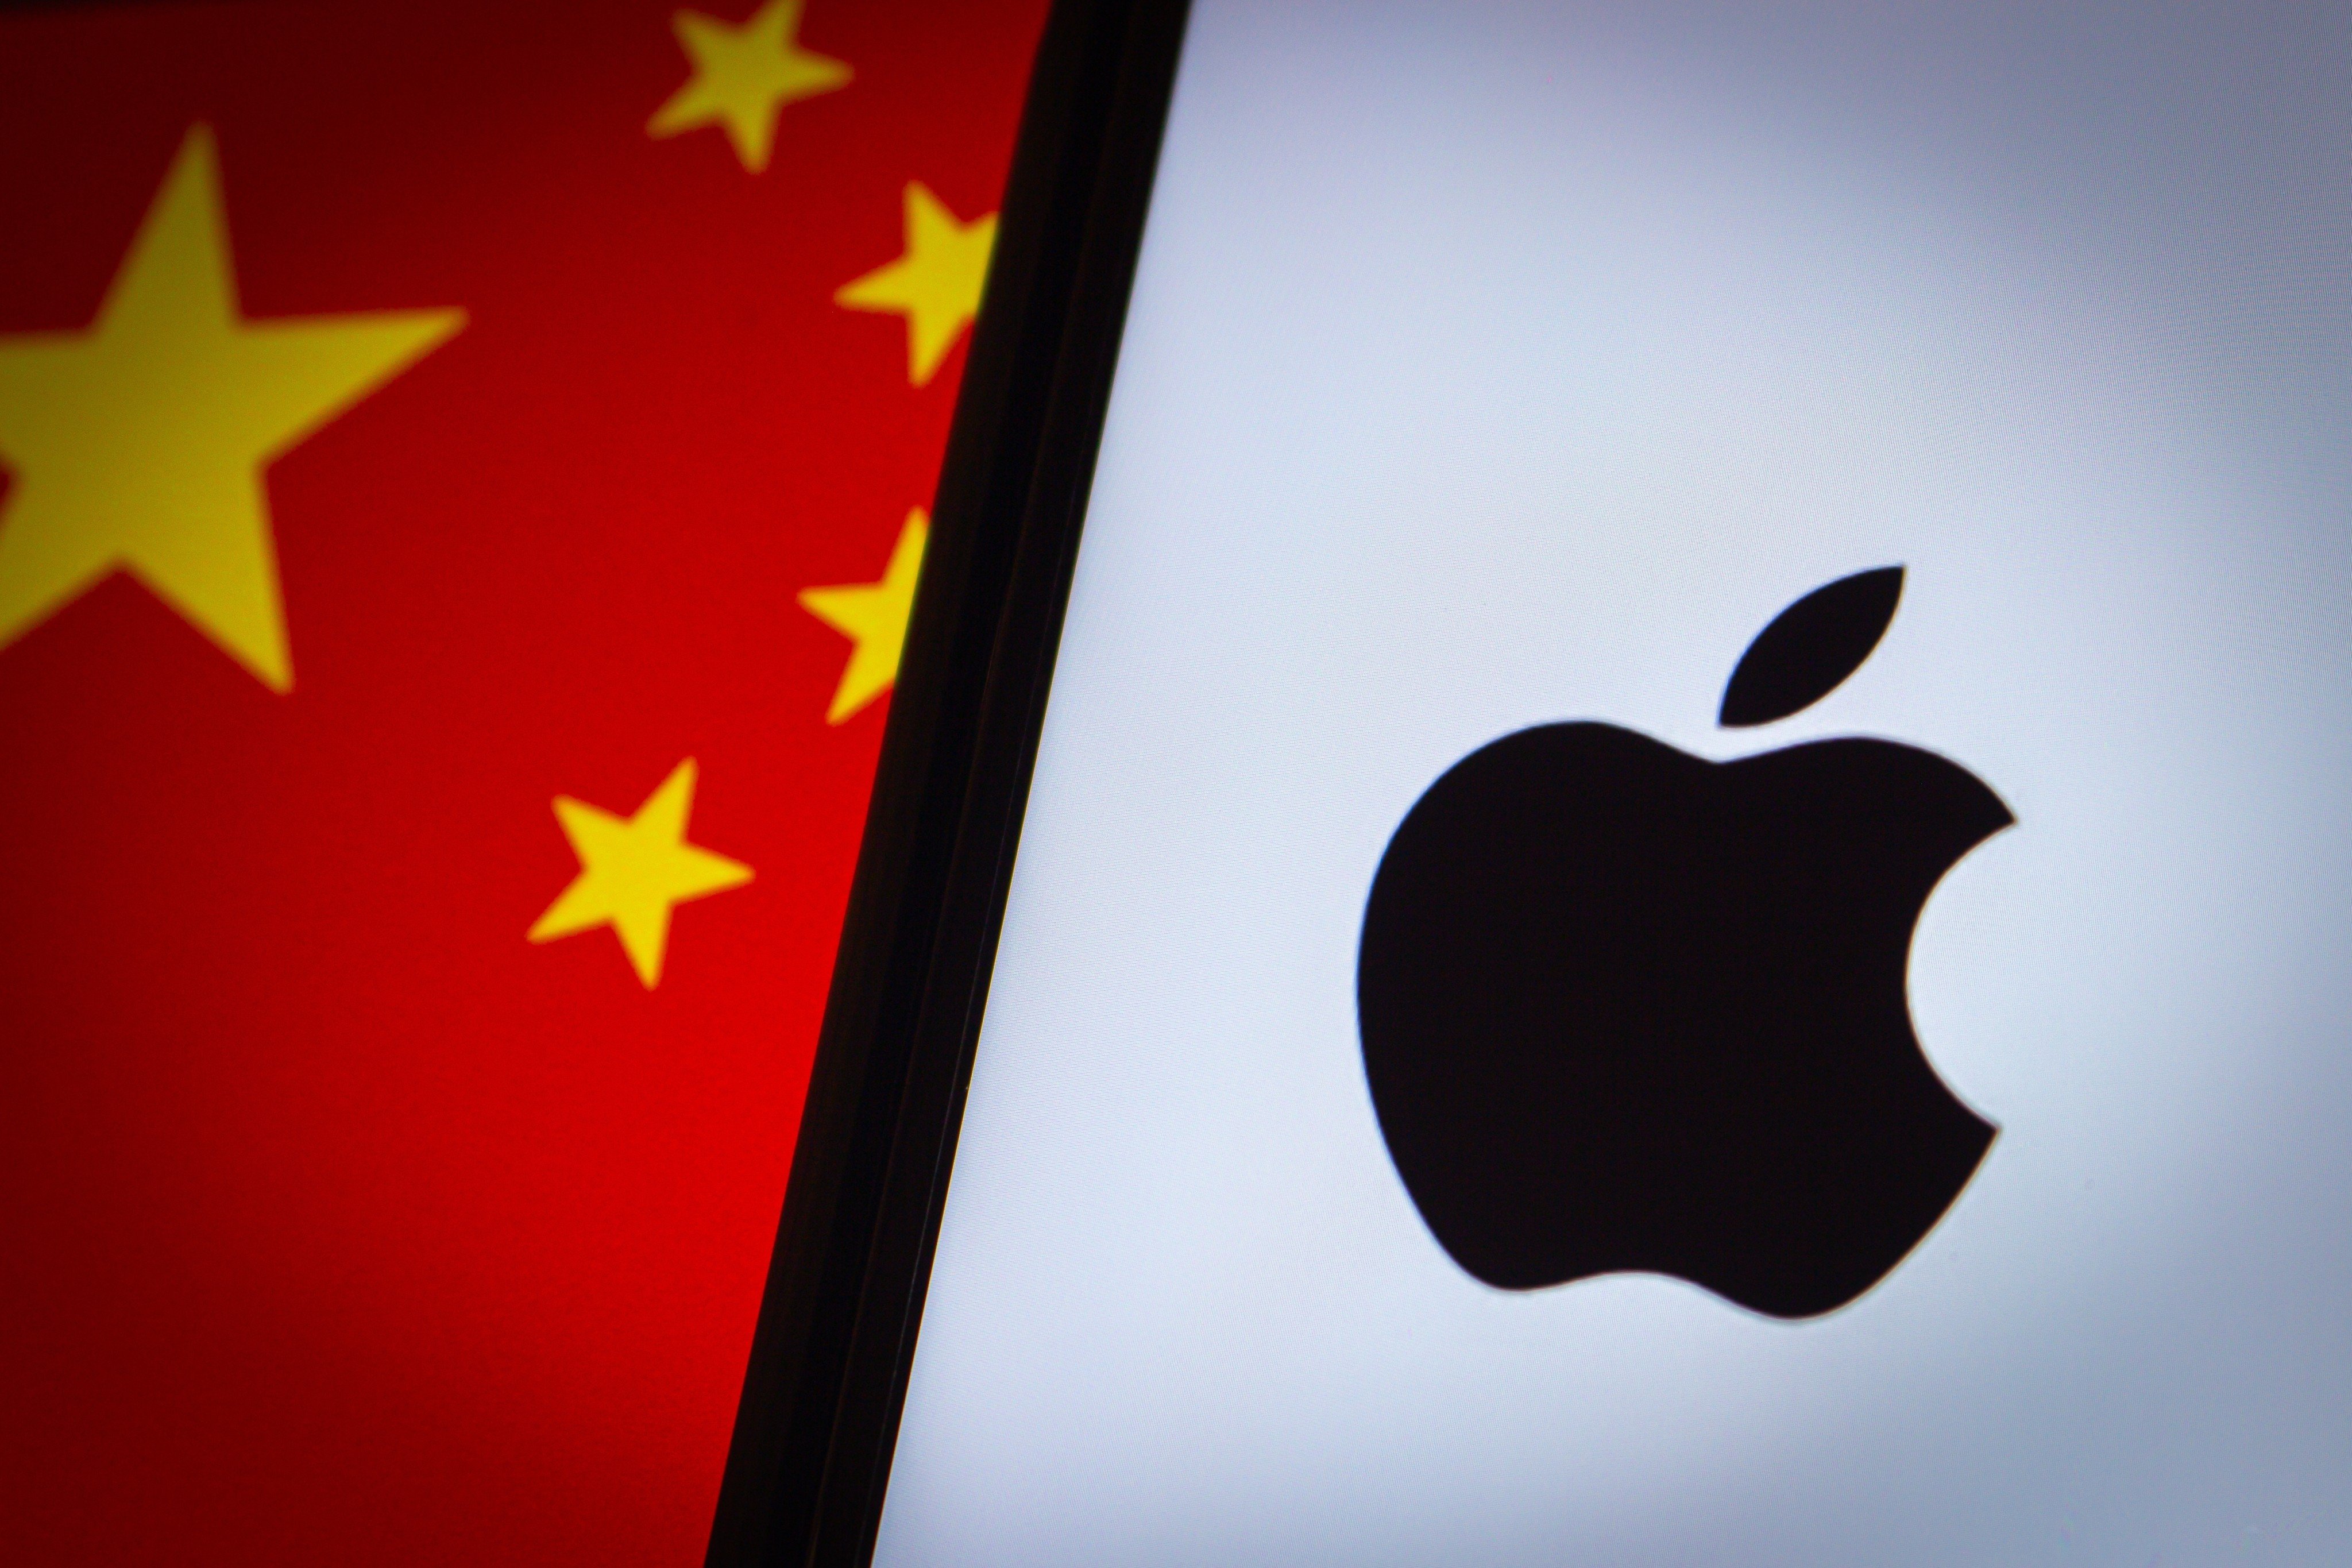 A meeting between an Apple executive and Shenzhen official has underscored China’s important place in the iPhone maker’s supply chain. Photo: Shutterstock